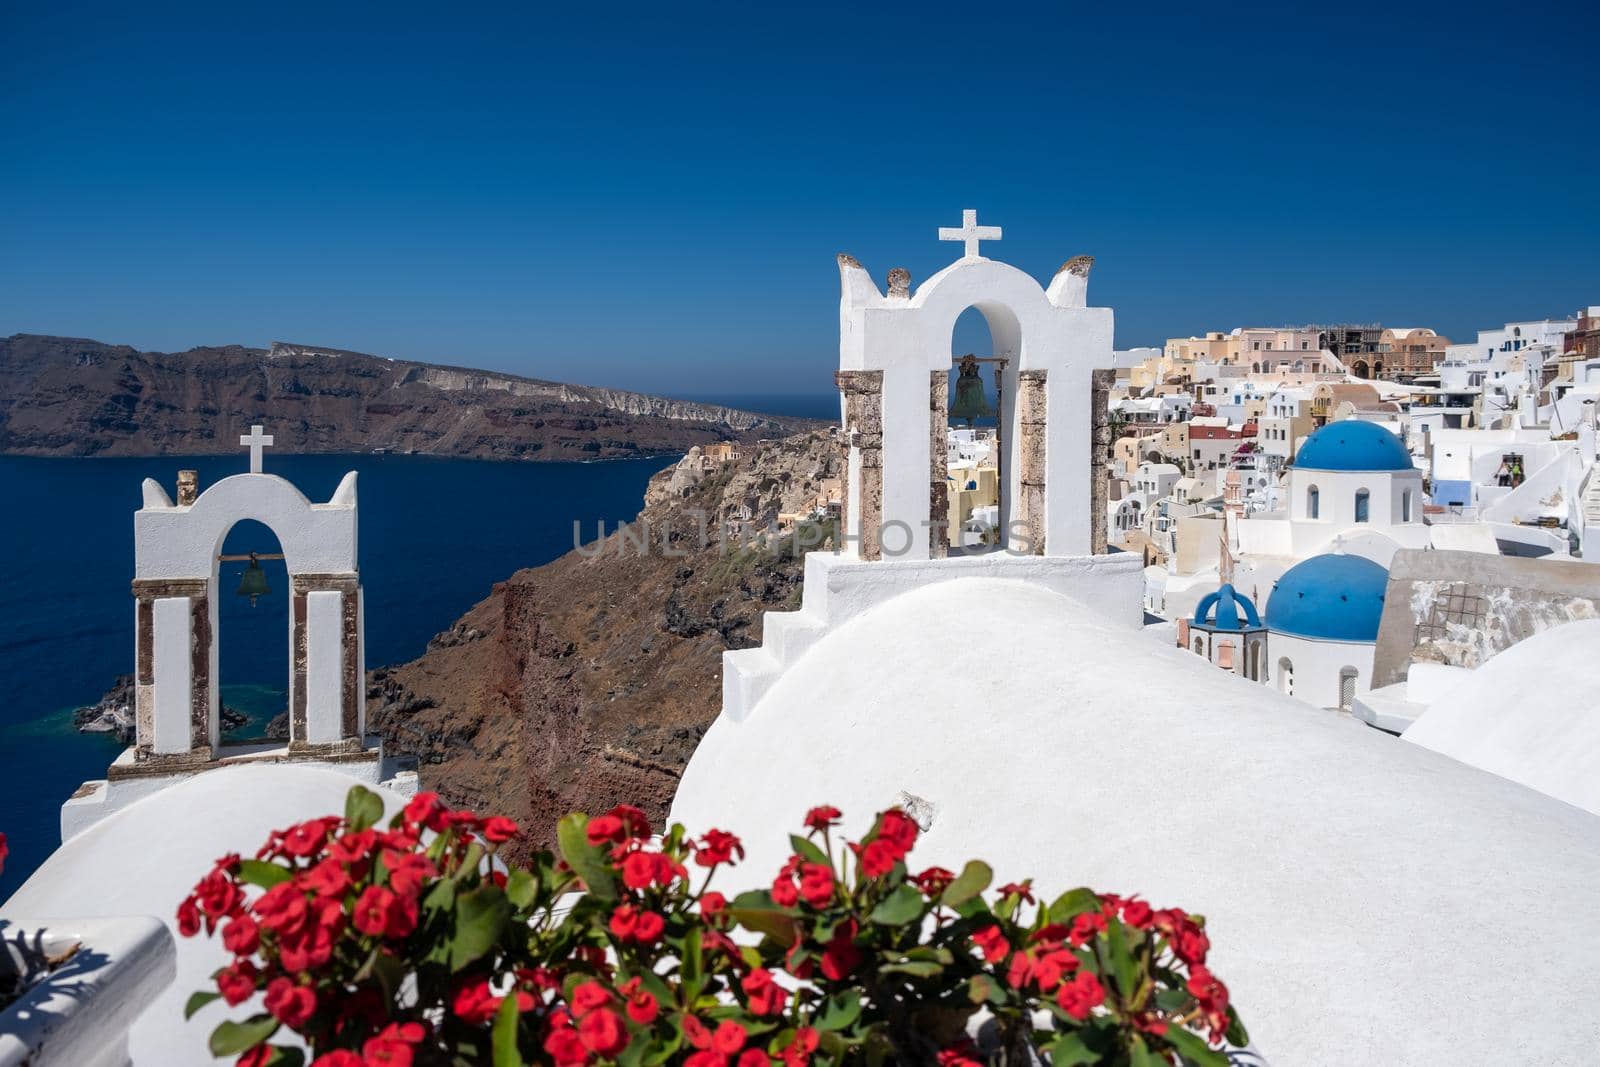 Santorini, Greece. Picturesq view of traditional cycladic Santorini houses on small street with flowers in foreground. Location: Oia village, Santorini, Greece. Vacations background. by fokkebok